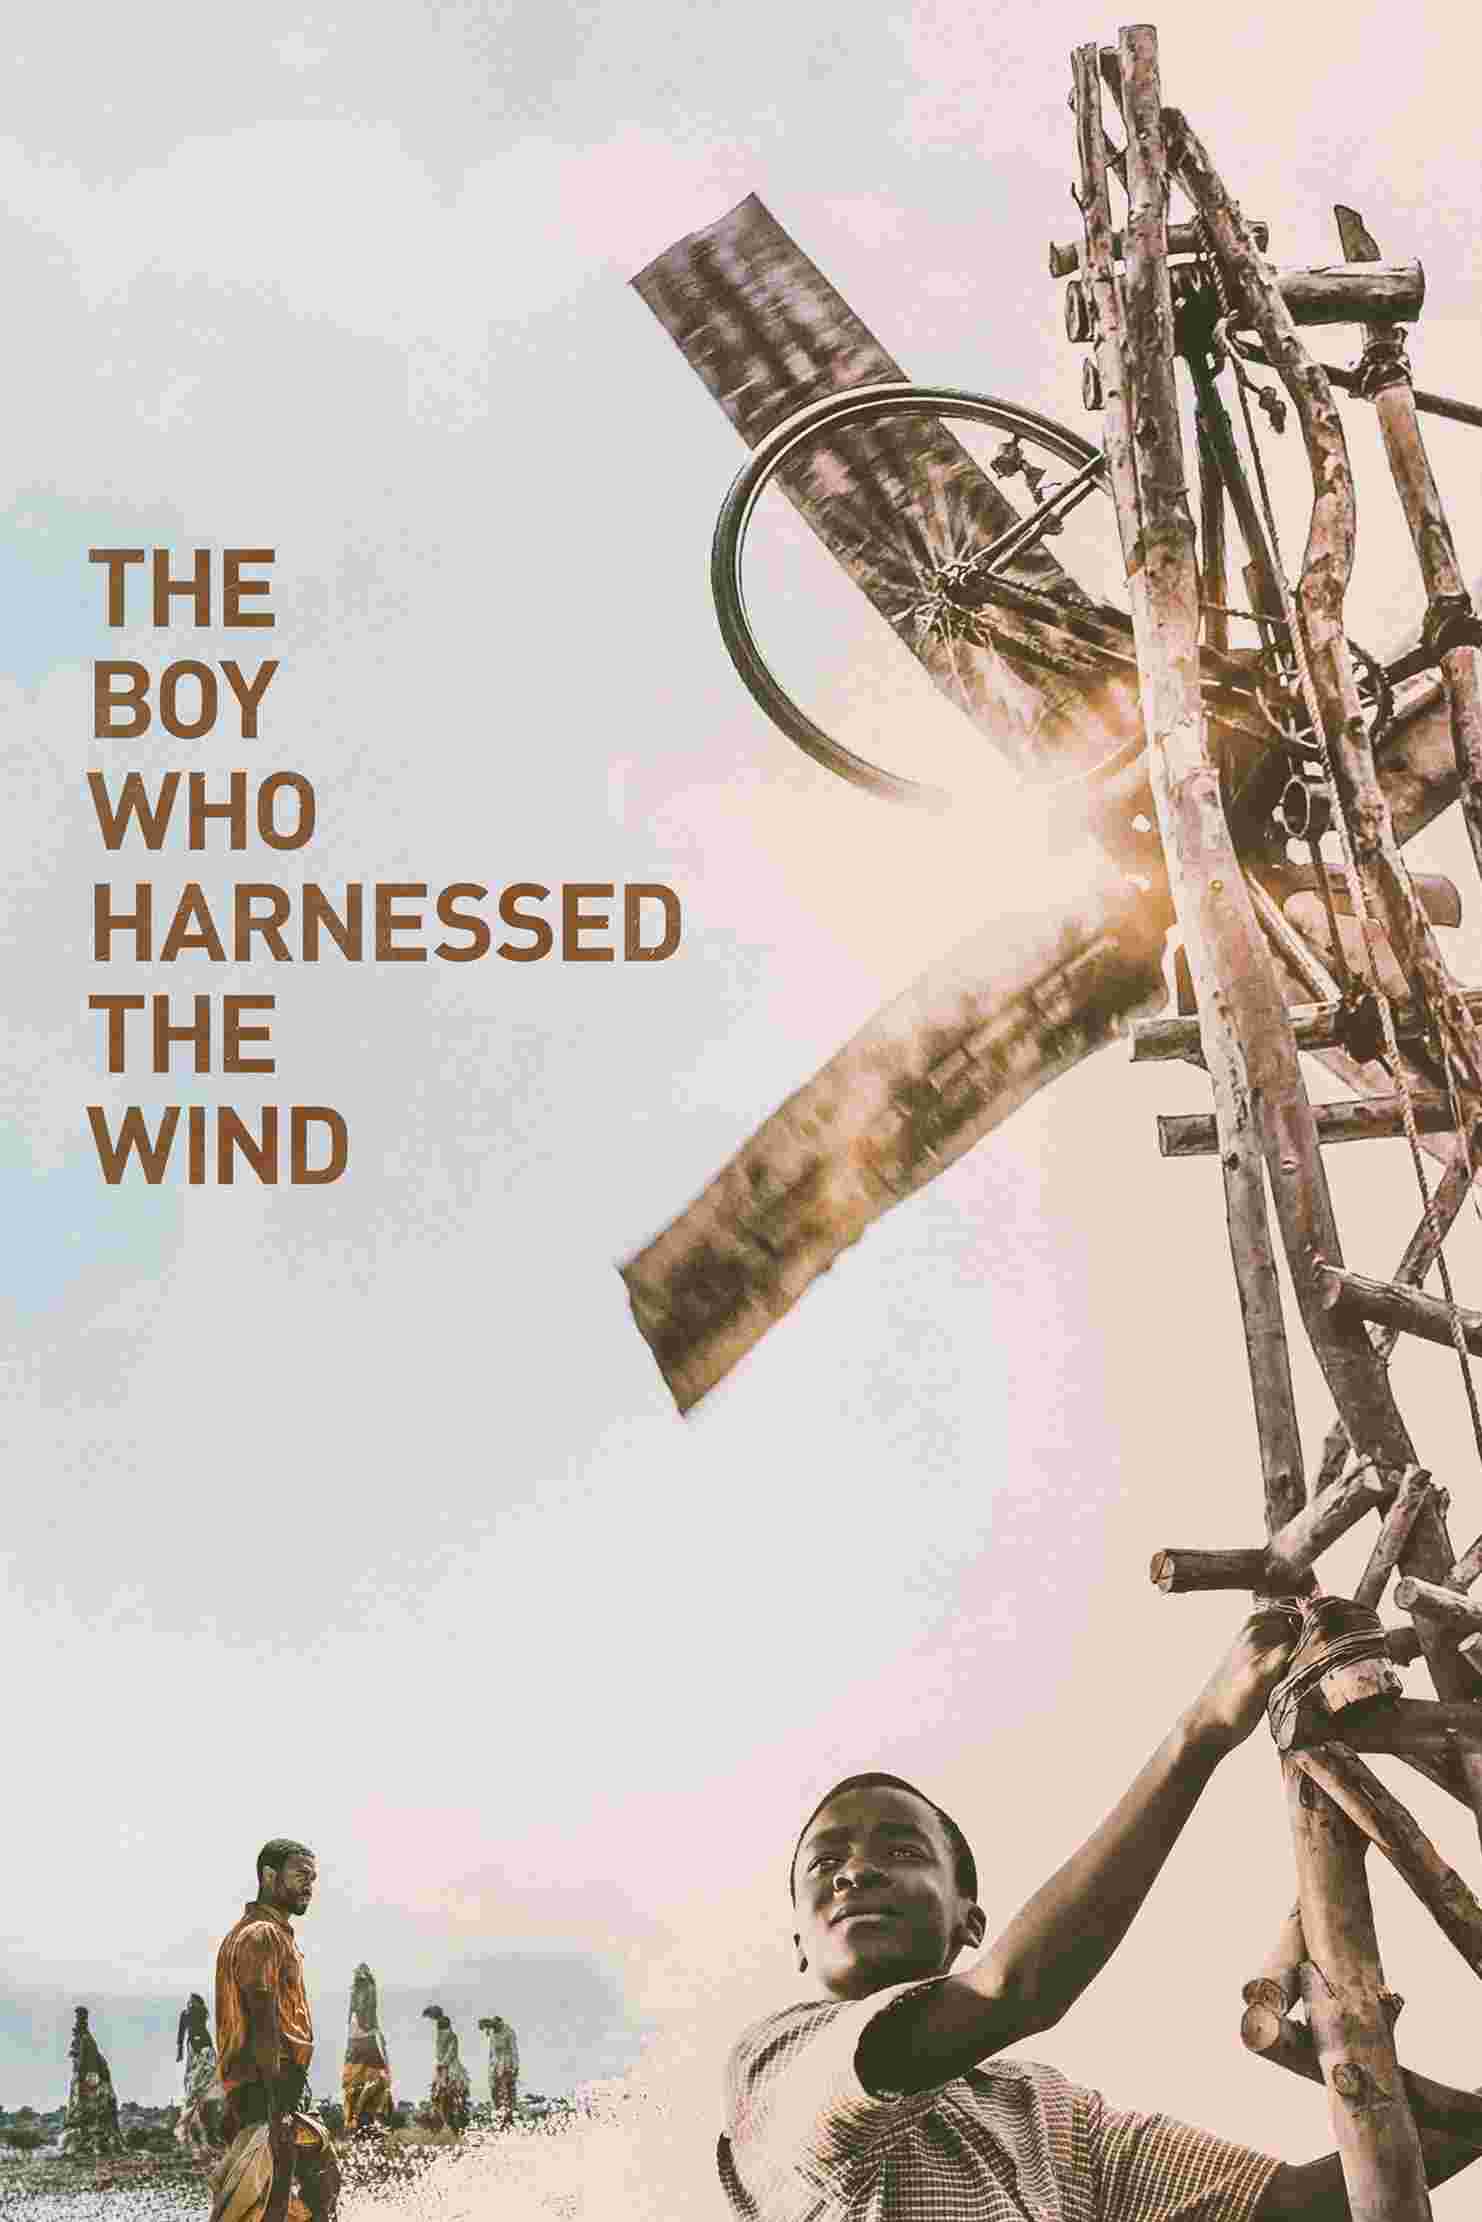 The Boy Who Harnessed the Wind (2019) Chiwetel Ejiofor